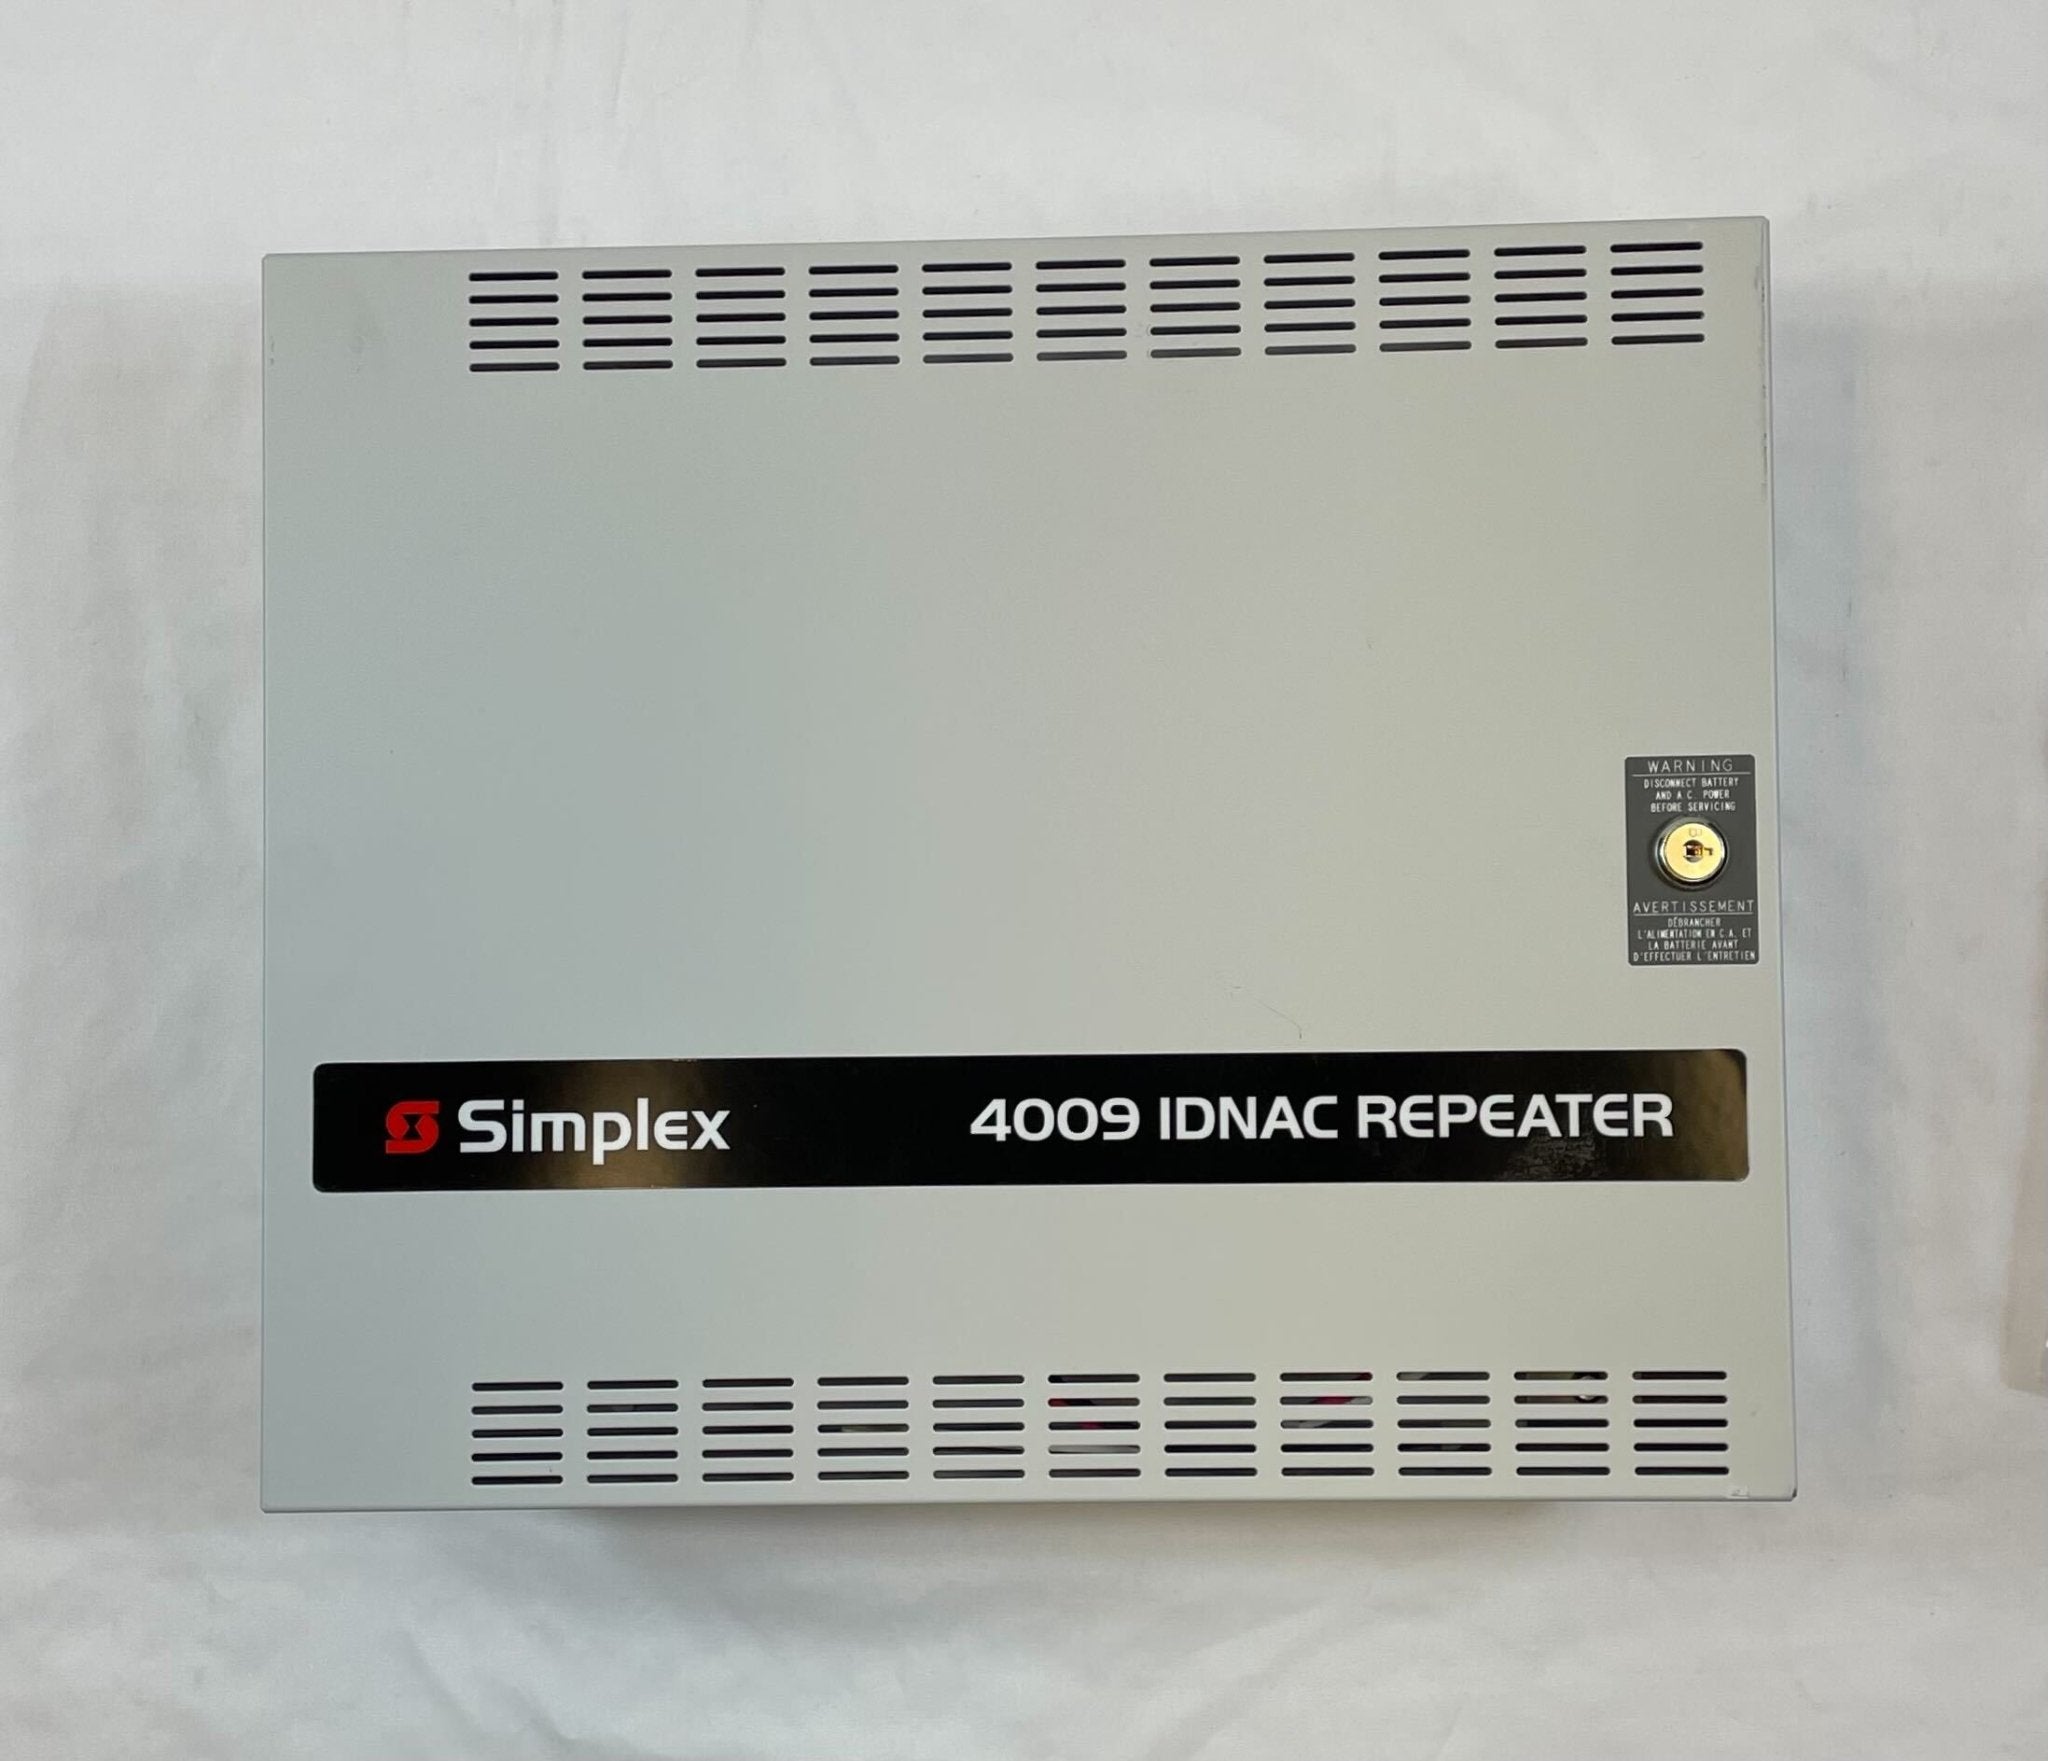 Simplex 4009-9601 4009 Idnac Repeater - The Fire Alarm Supplier